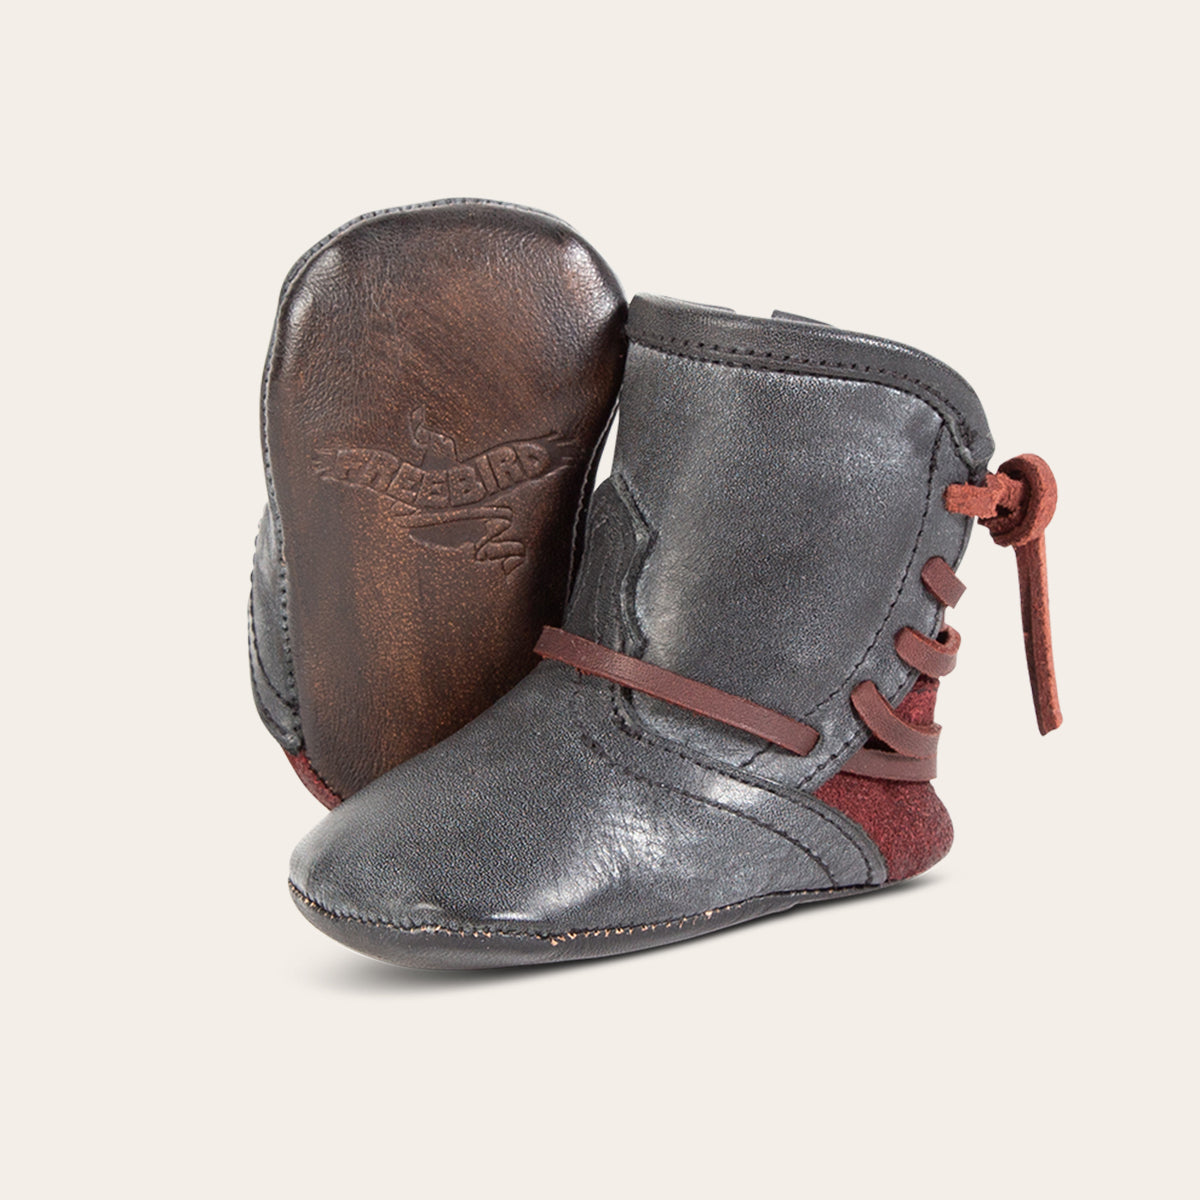 front view showing contrasting leather lace detailing and soft leather imprinted sole on FREEBIRD infant baby coal black leather bootie 